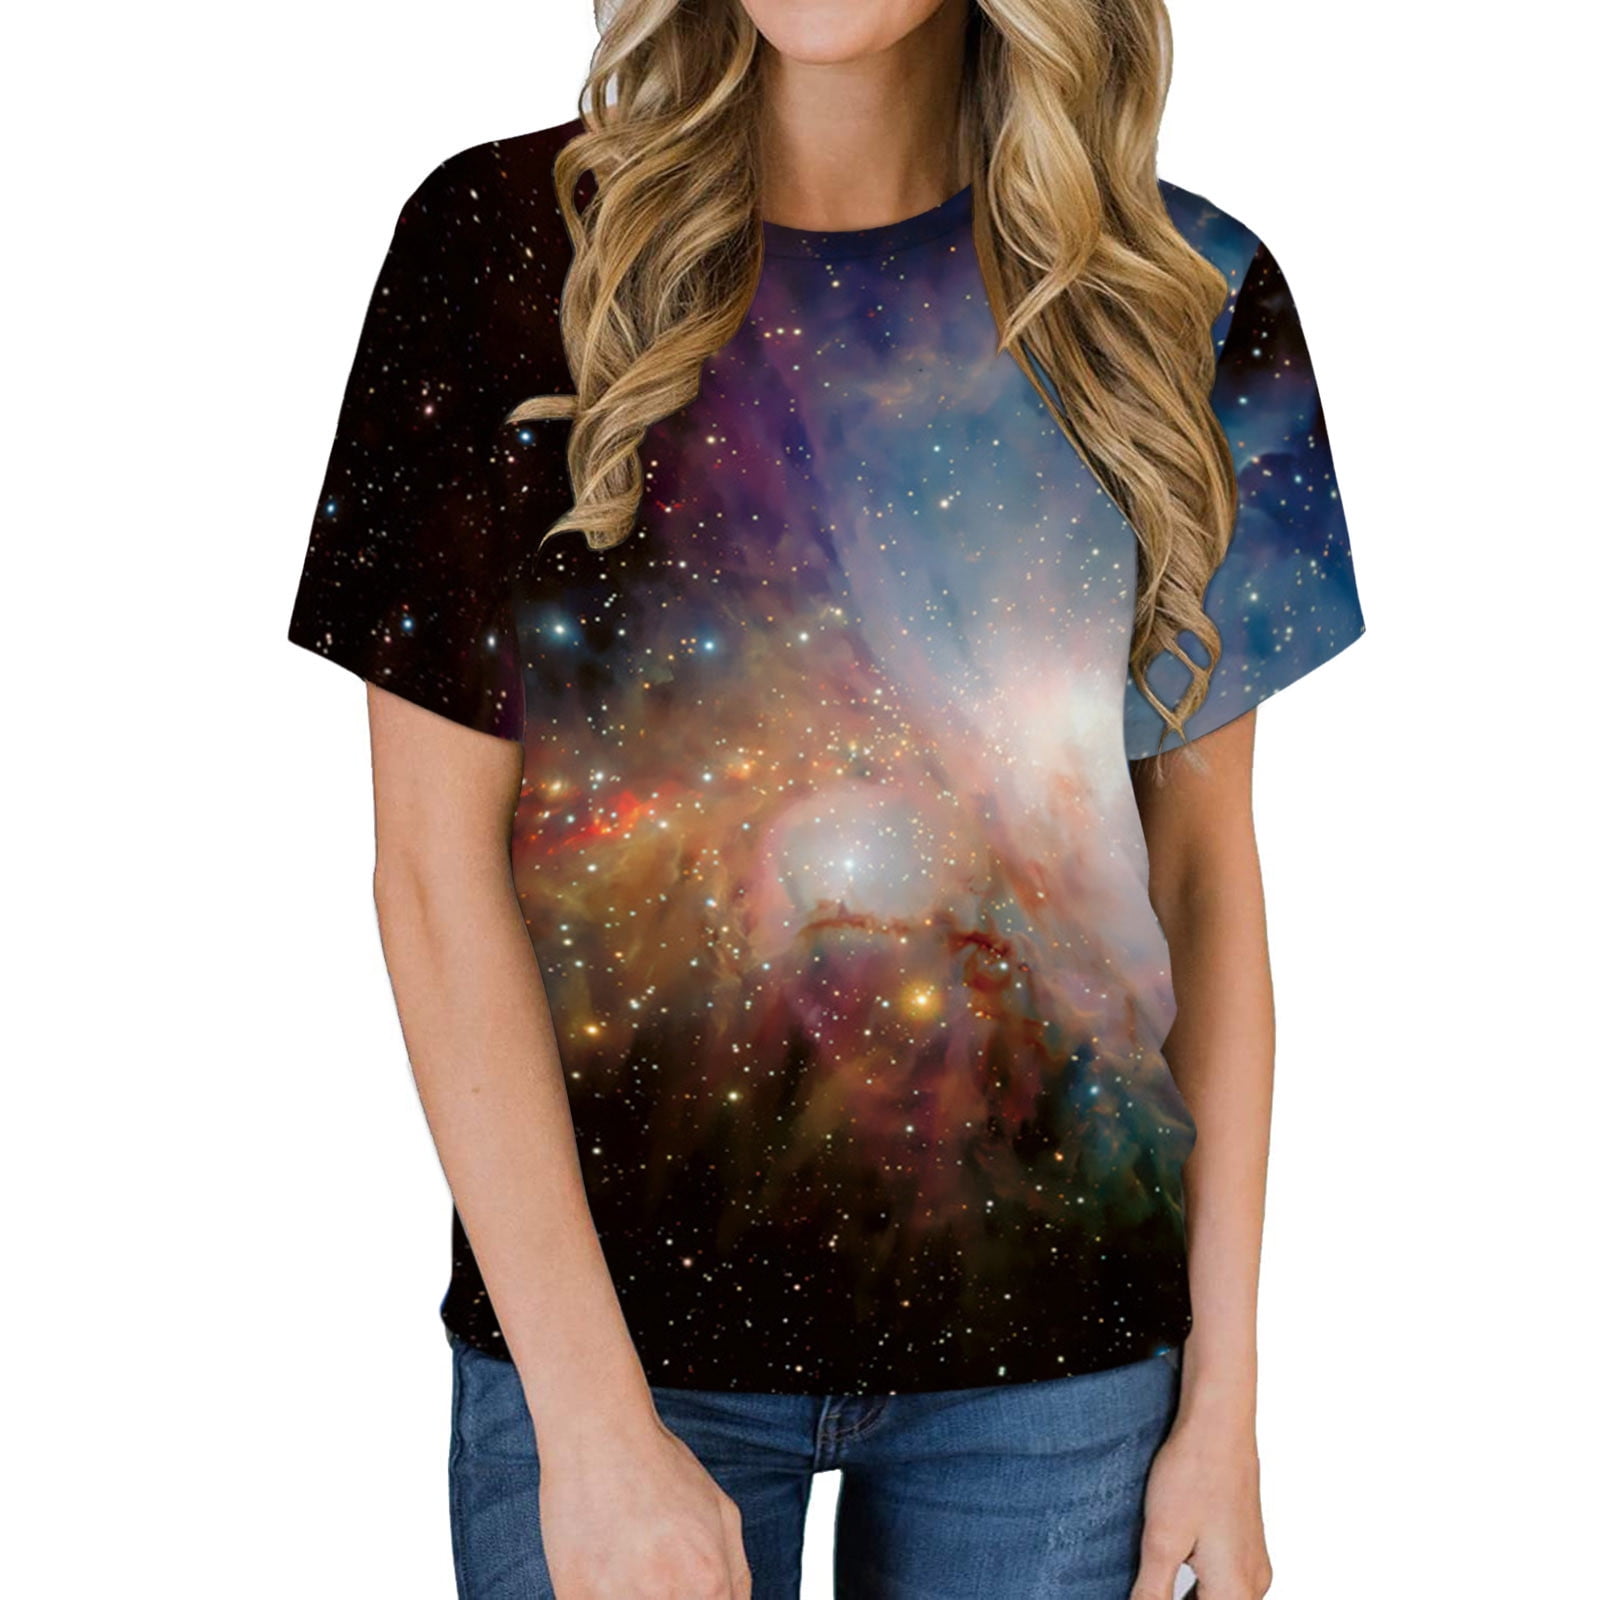 Nebula Galaxy Space 3d Printed Womens Mens Crew Graphic T-Shirts Casual Tee Tops 